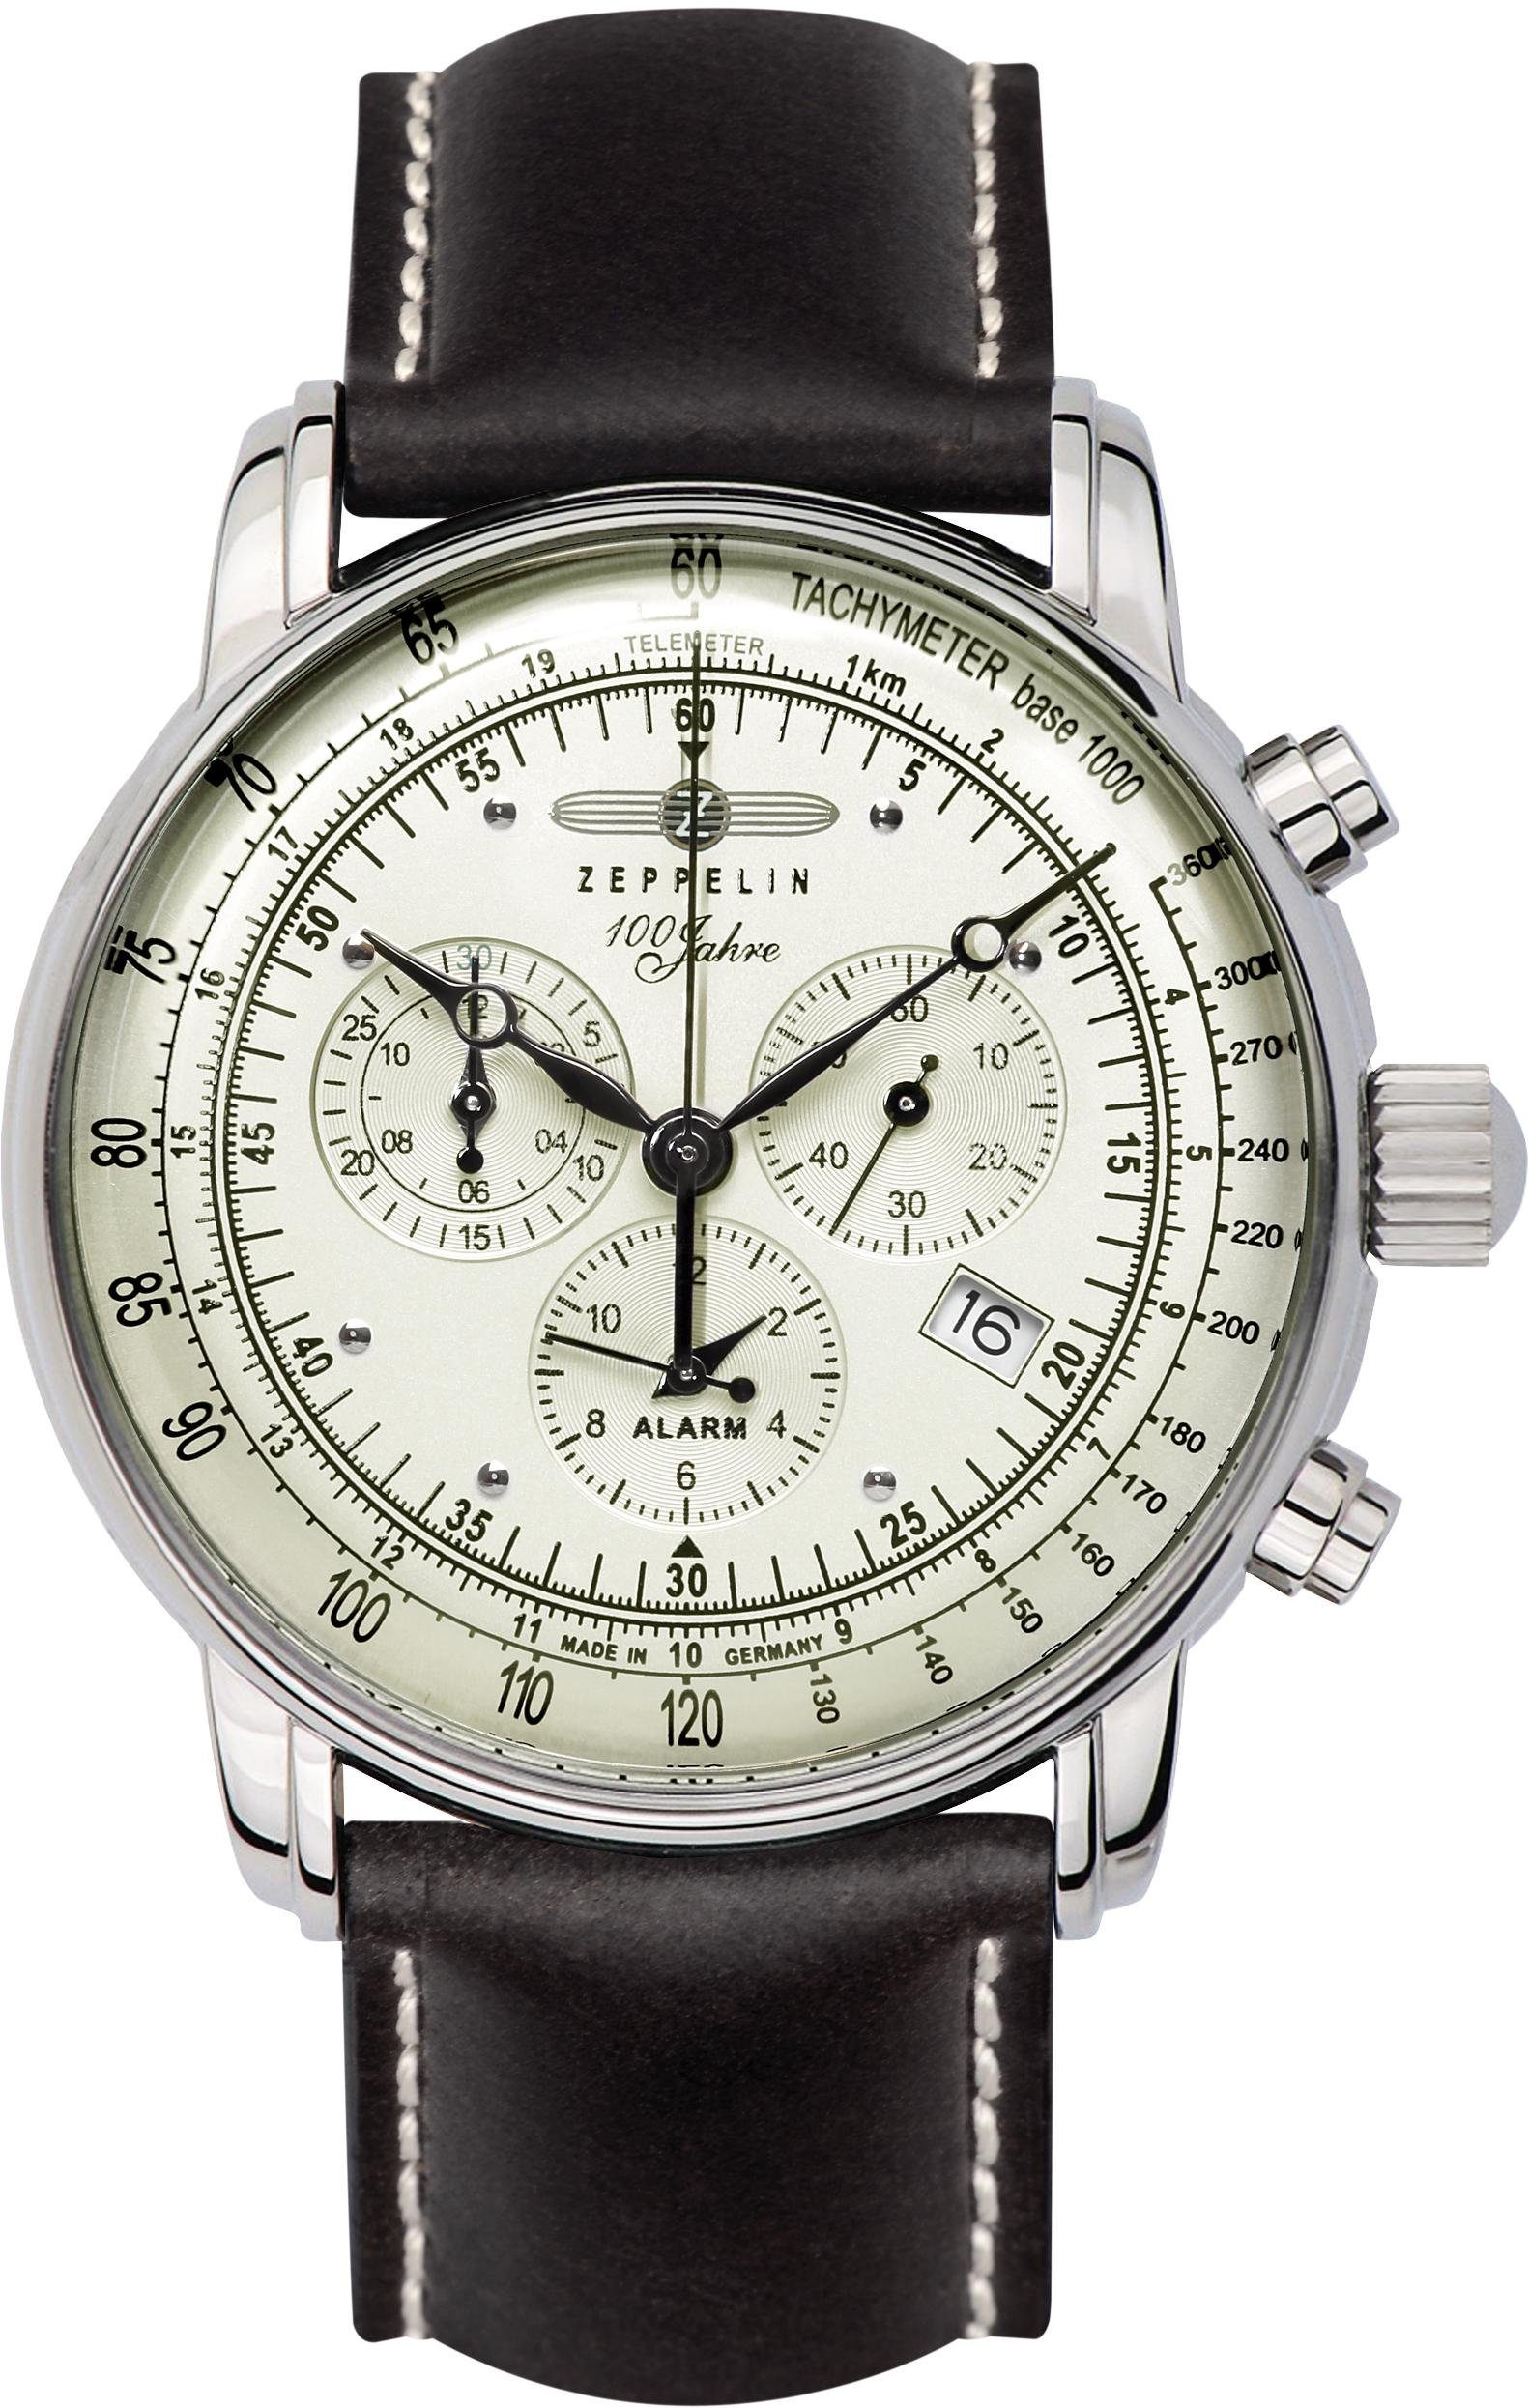 ZEPPELIN Chronograph 100 Jahre Made 8680-3, Germany in Zeppelin